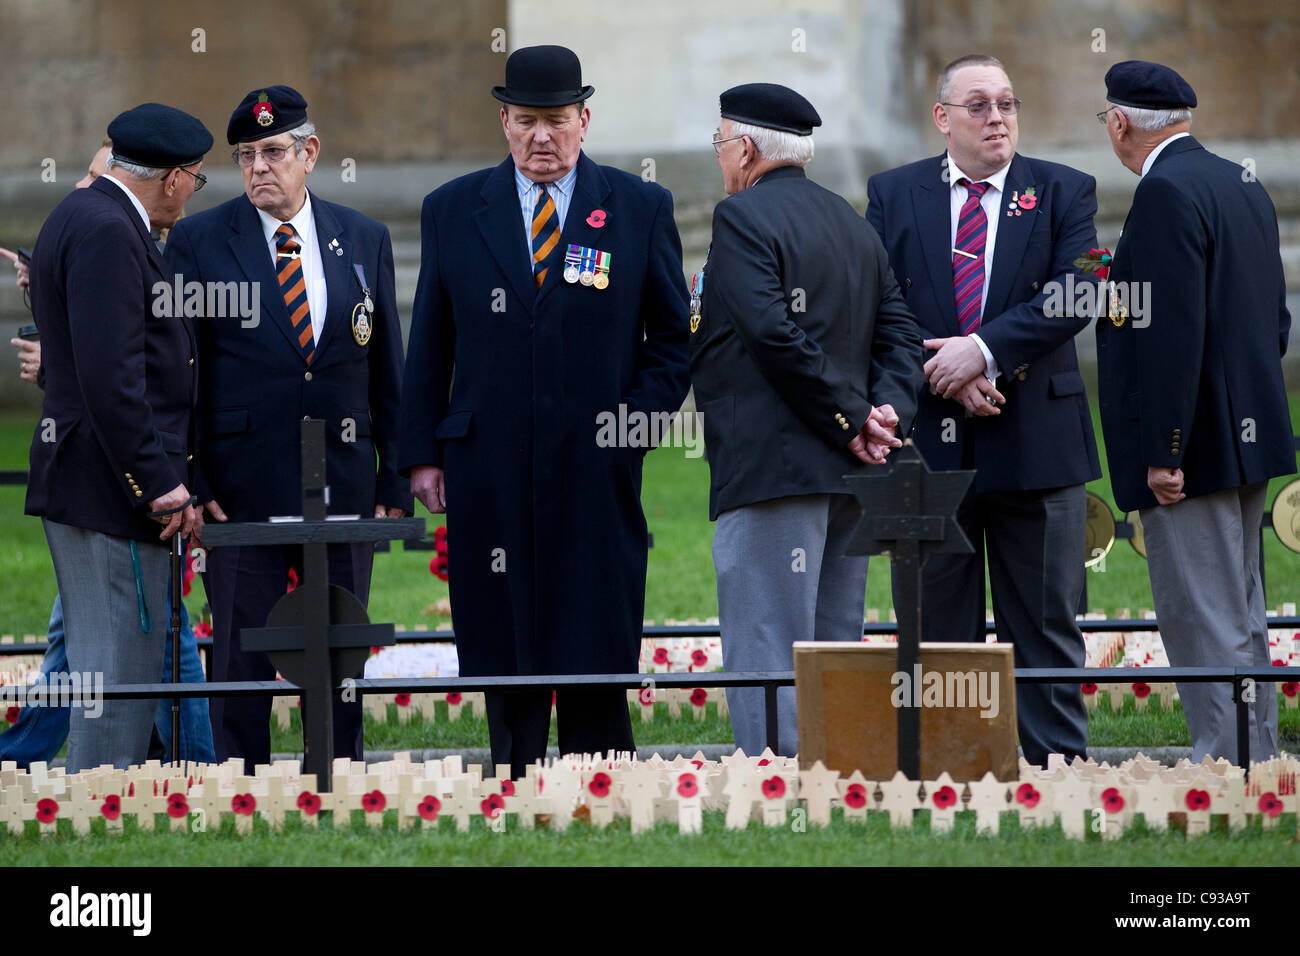 Westminster Abbey, London, UK. 10.11.2011 Ex-servicemen pay their respects at Westminster Abbey's Garden of Remembrance ahead of the annual Remembrance Day Service. Stock Photo